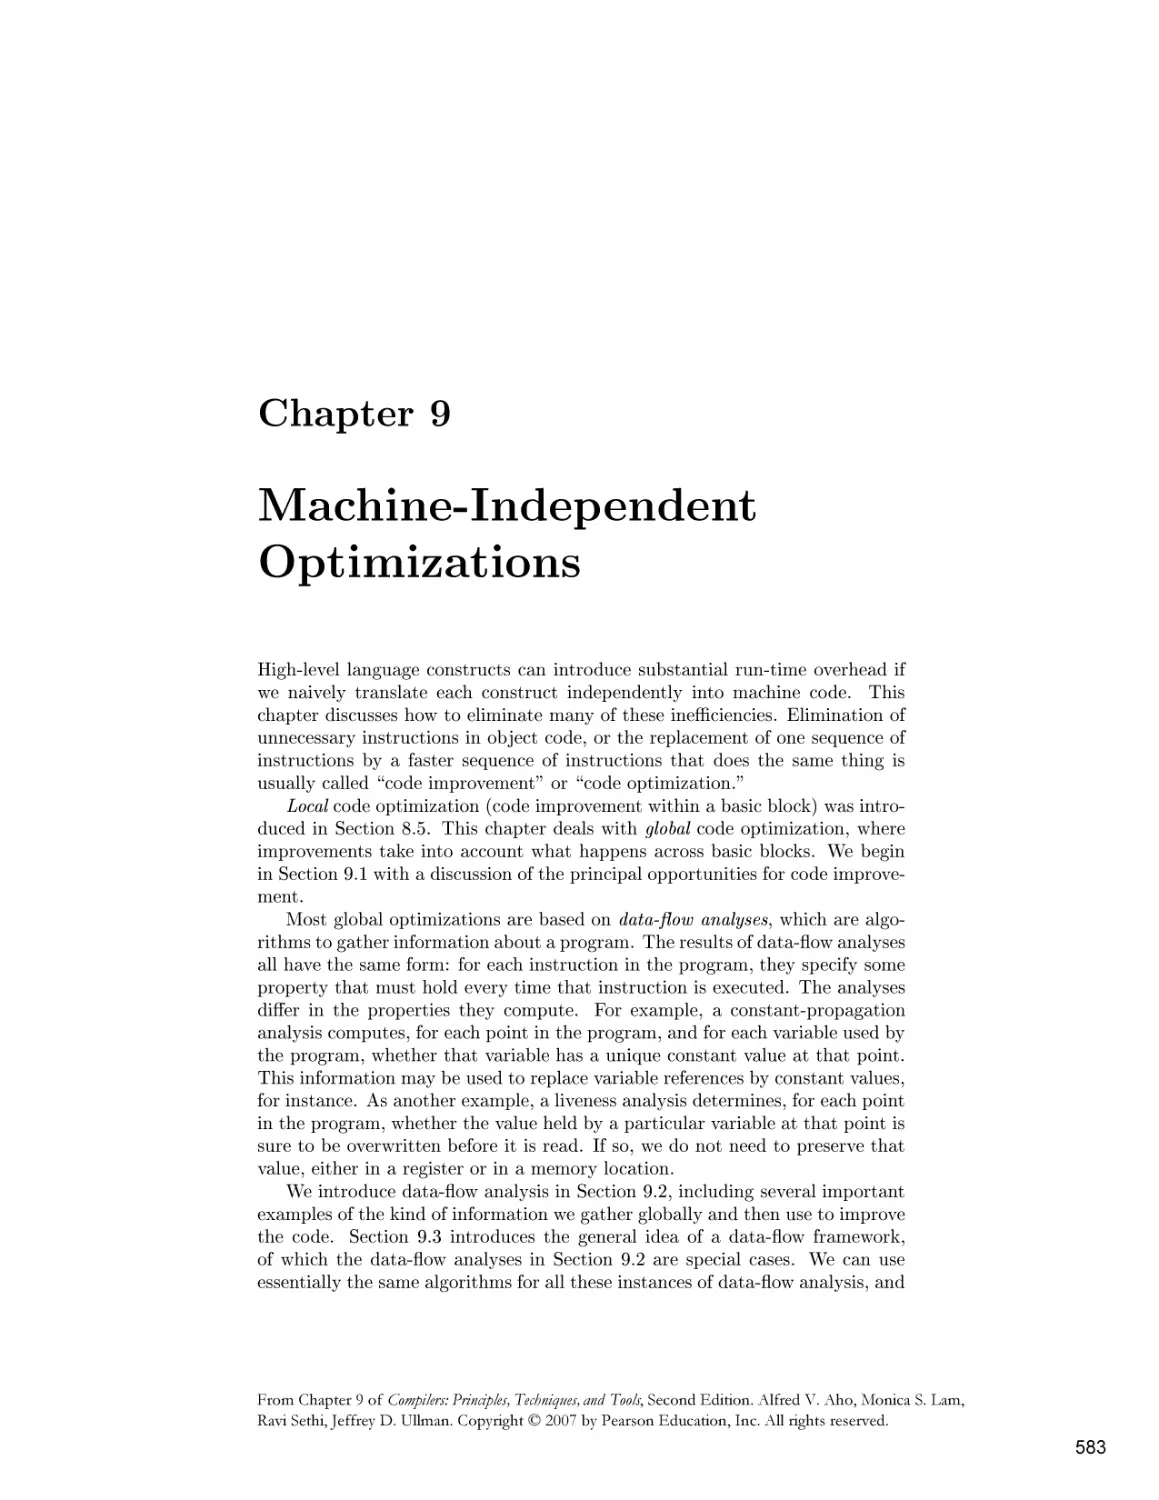 Chapter 9. Machine-Independent Optimizations